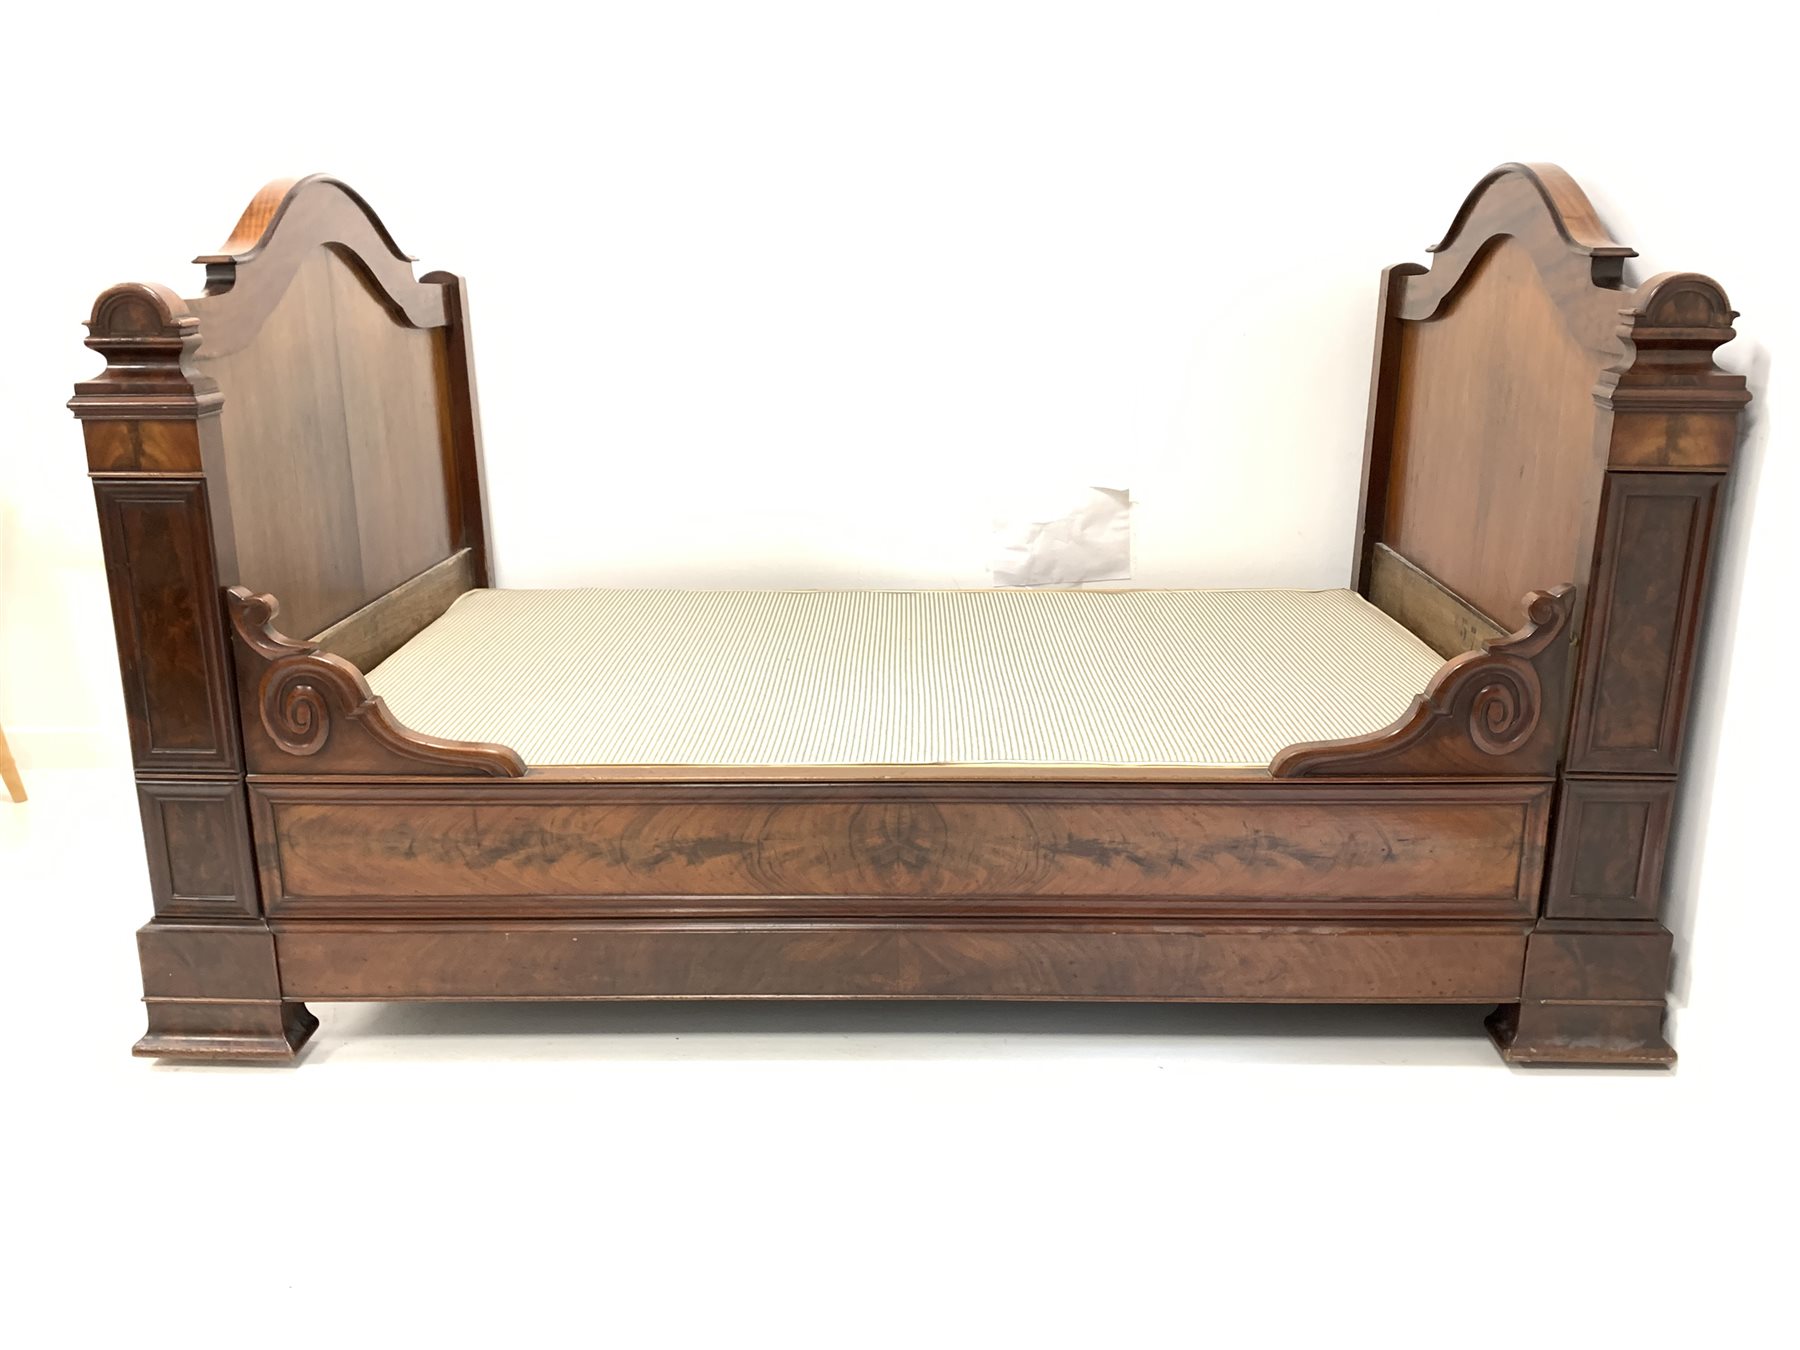 19th century continental figured mahogany single bed, with box base